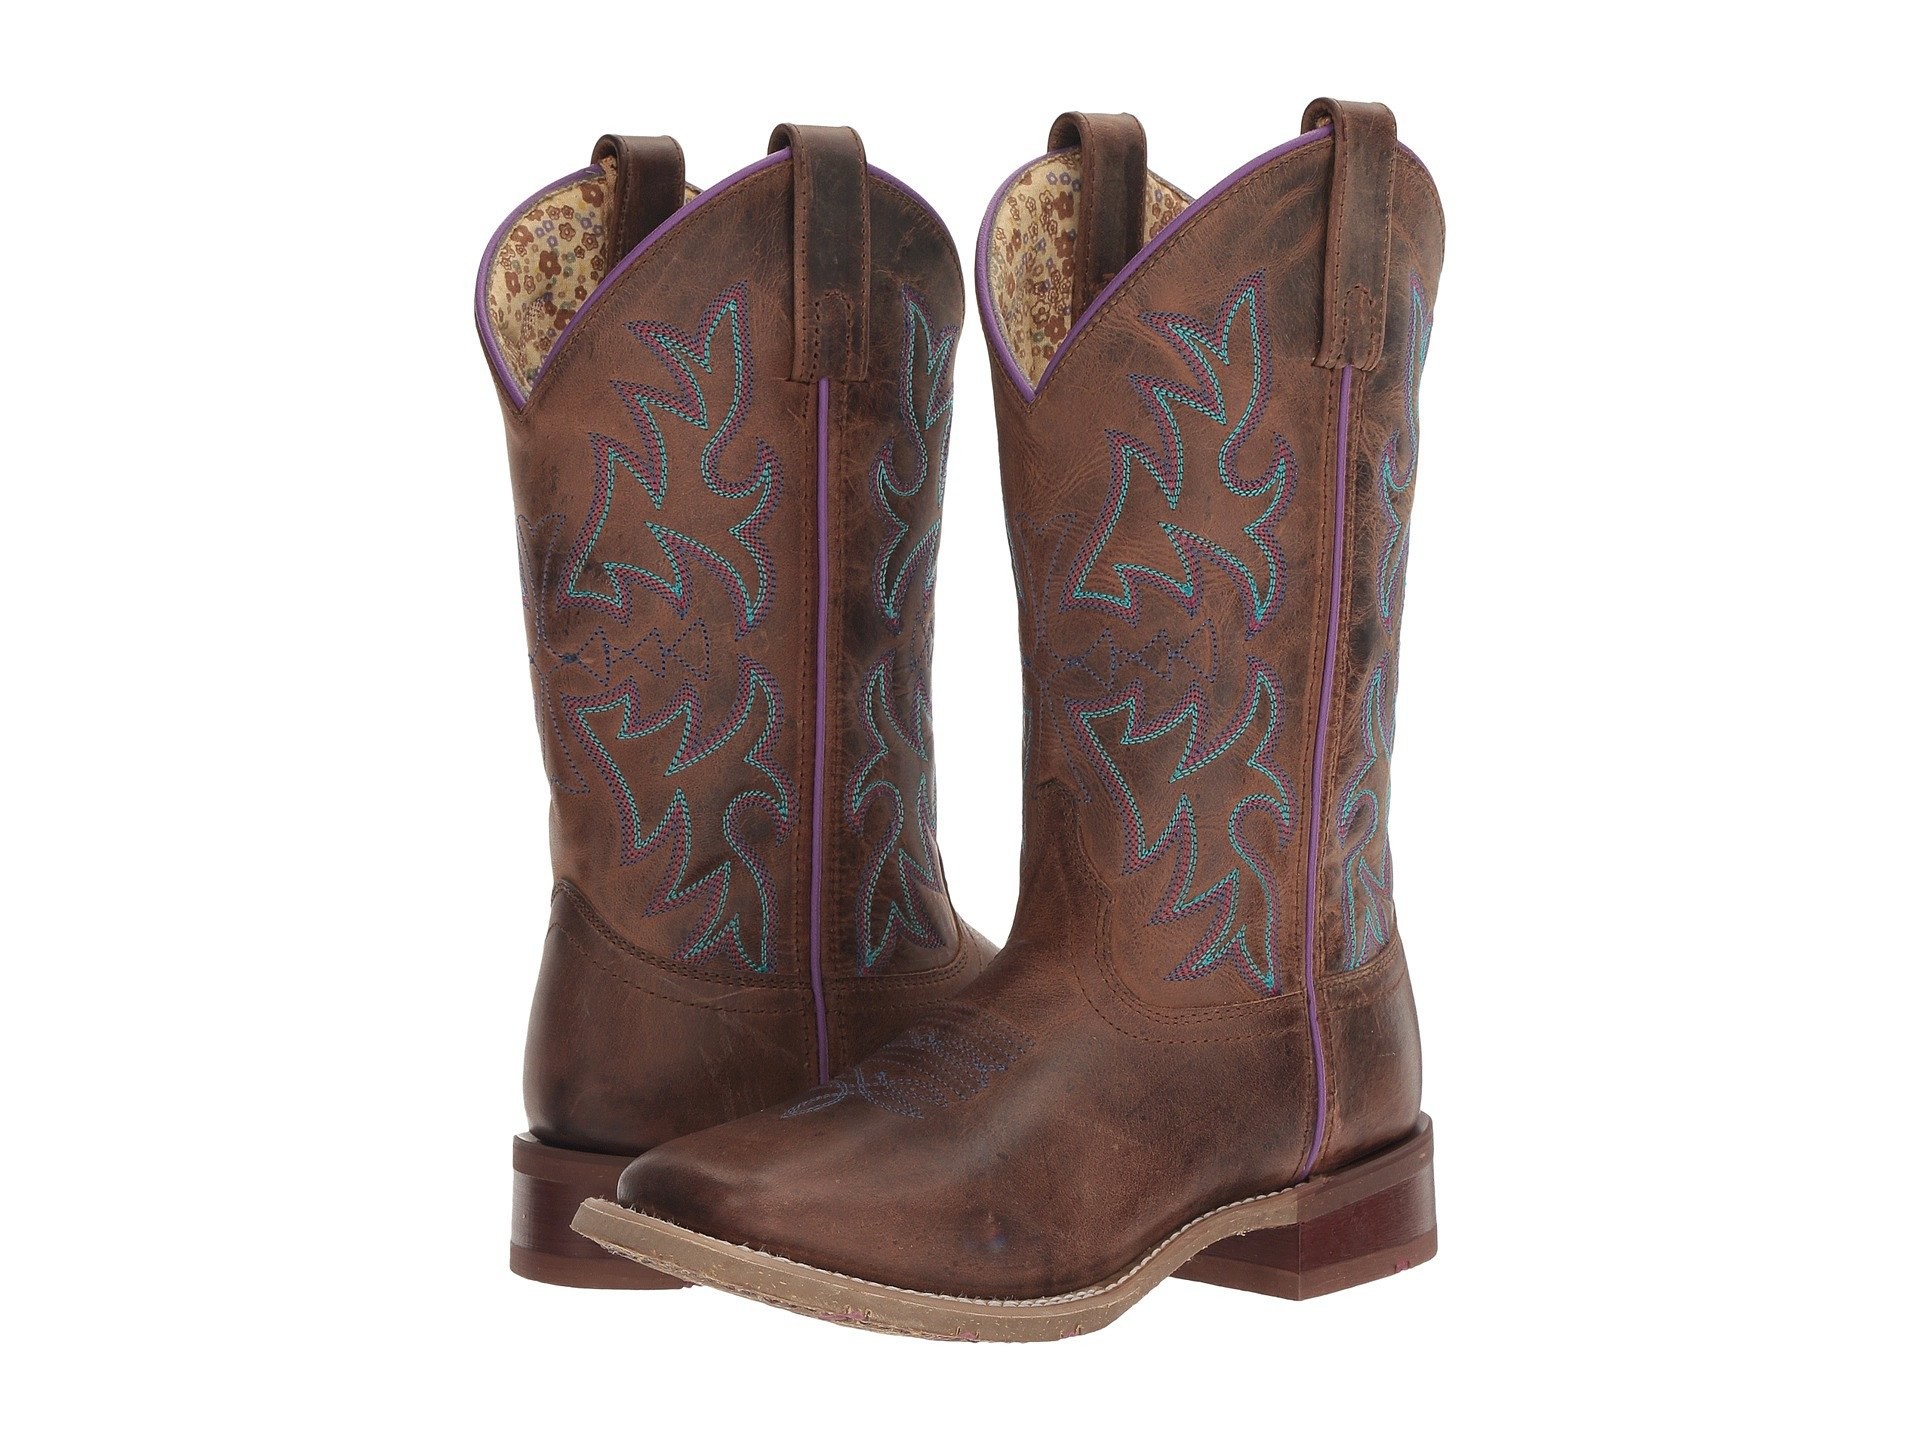 1920x1440 Laredo Women's Rust Ellery Embroidered Leather Cowboy Boots 5654